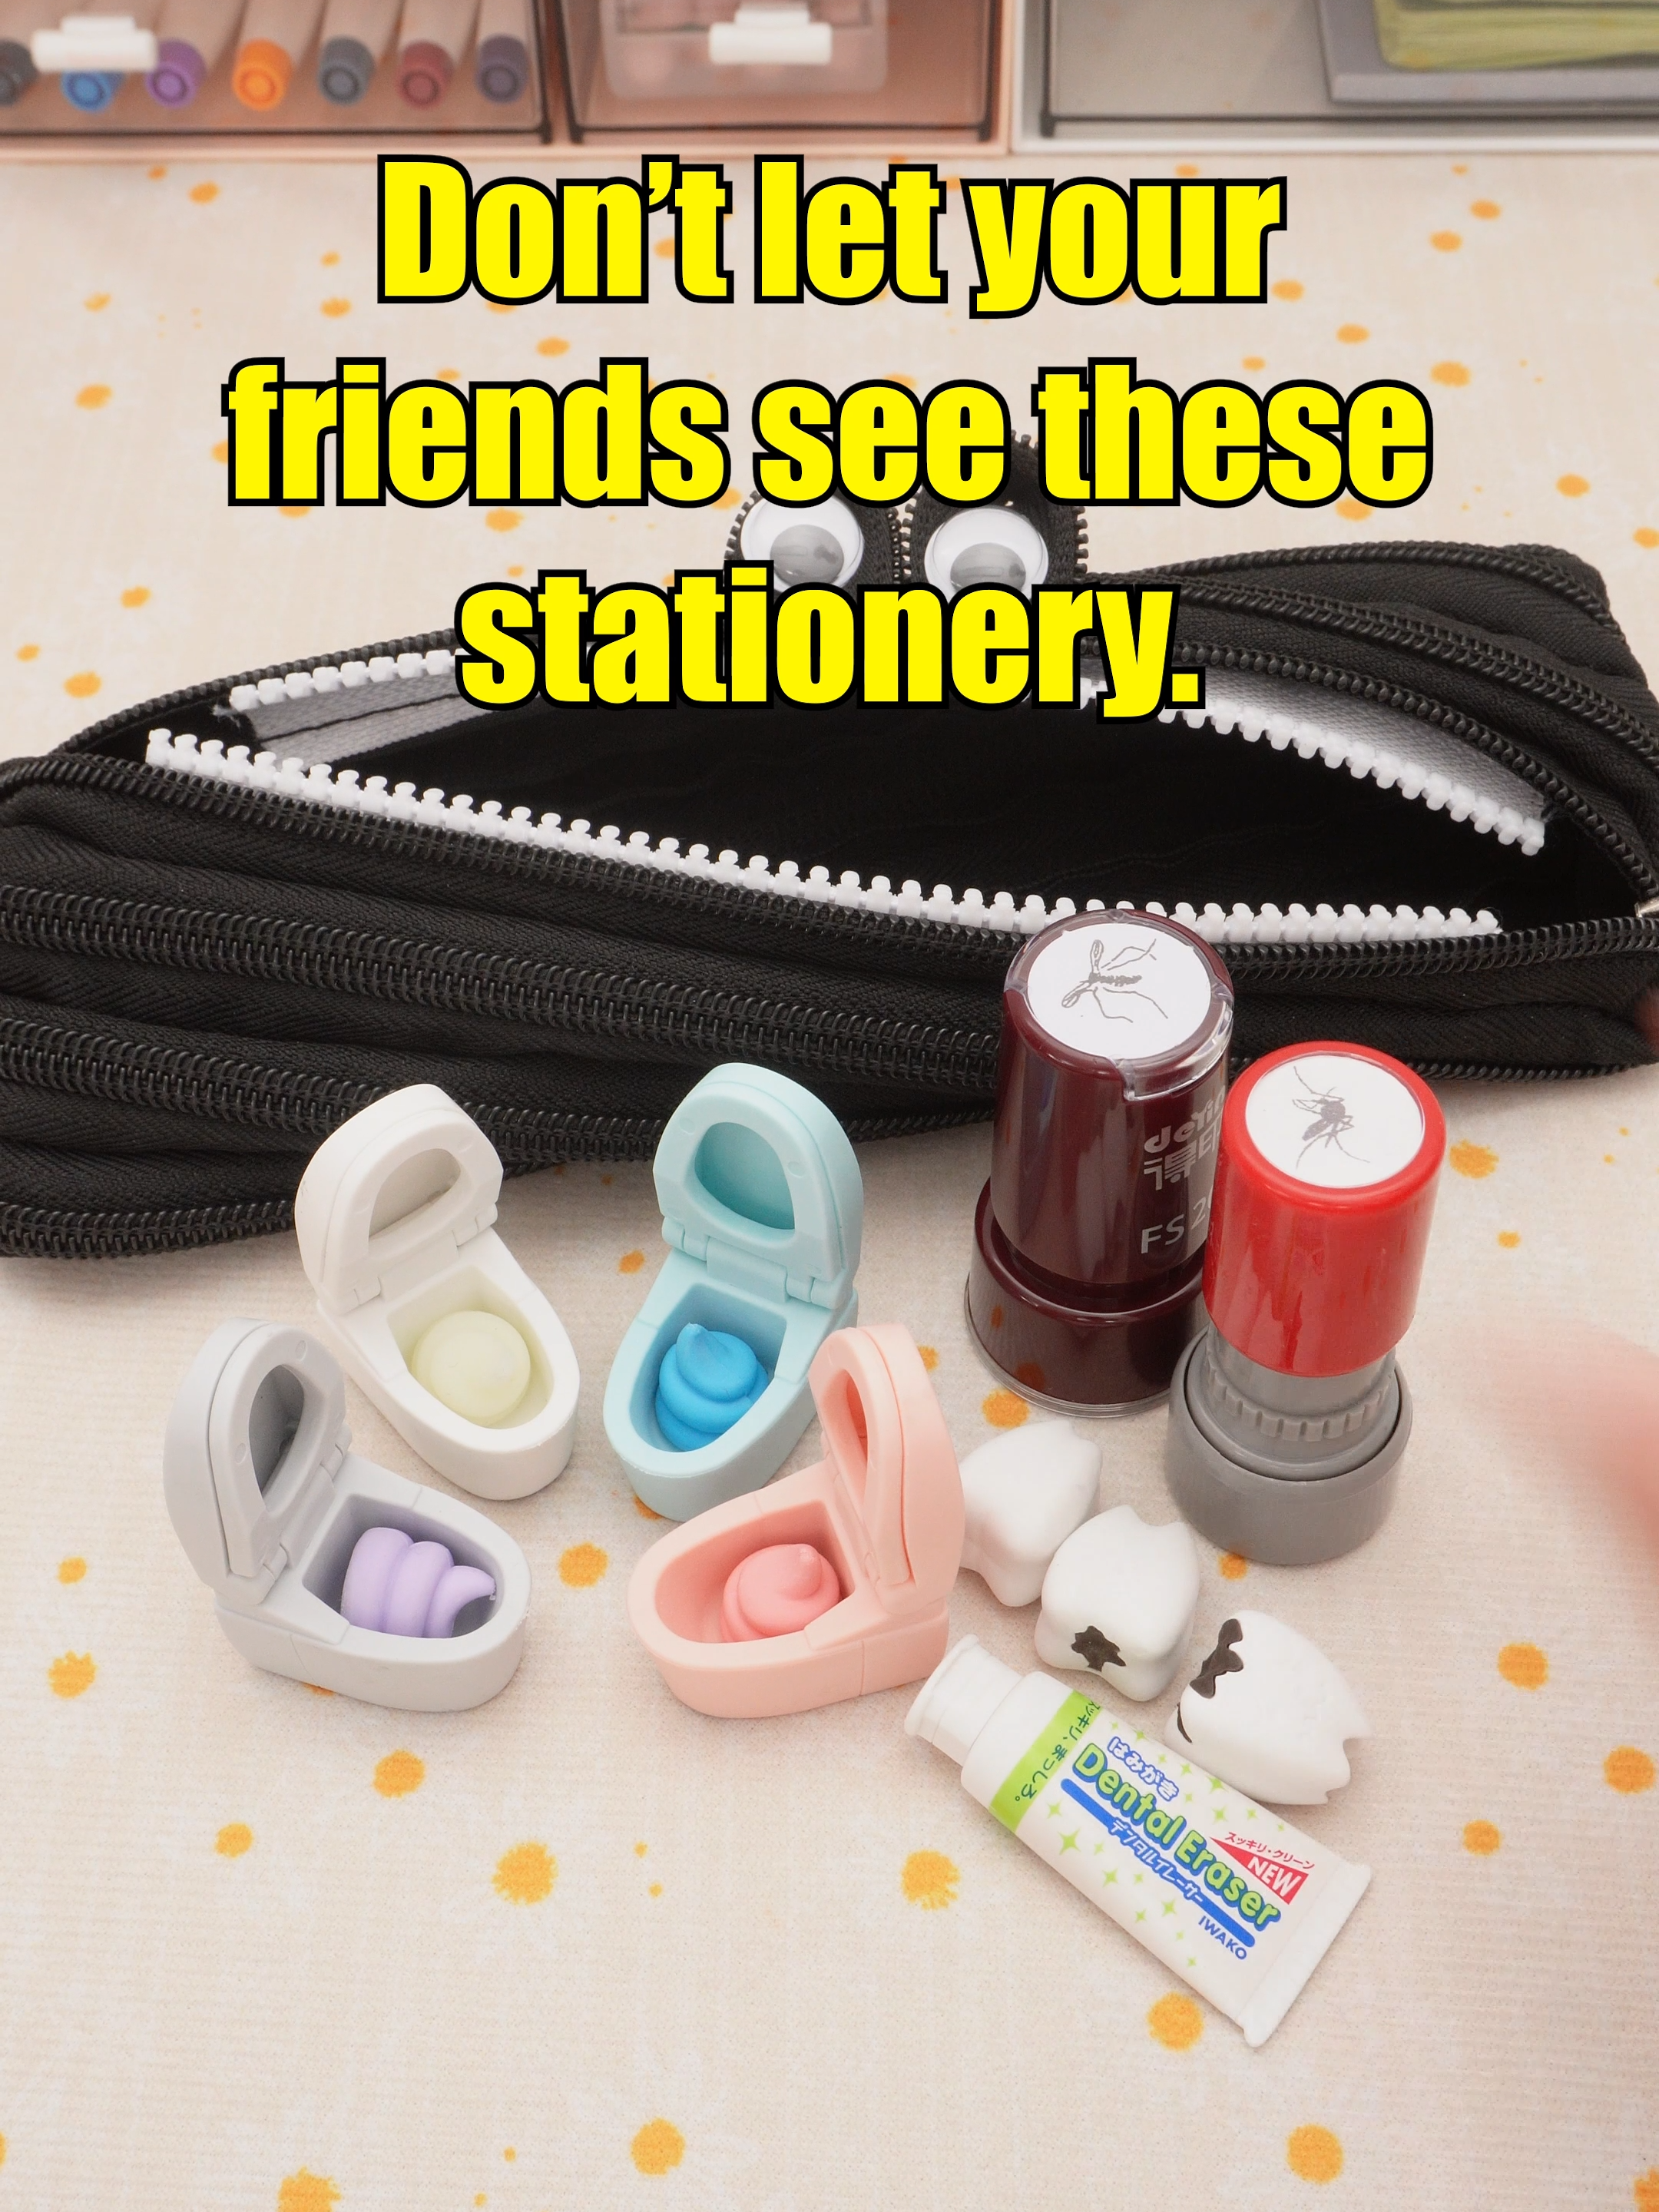 Don't let your friends see these stationery. 🔎Iwako Dental Eraser🔎Iwako Toilet Eraser 🔎Alive Mosquito Pattern Stamp🔎Dead Mosquito Pattern Stamp 🔎Zipper Pen Pouch - Black #capcut #stationerypal  #stationery  #fyp